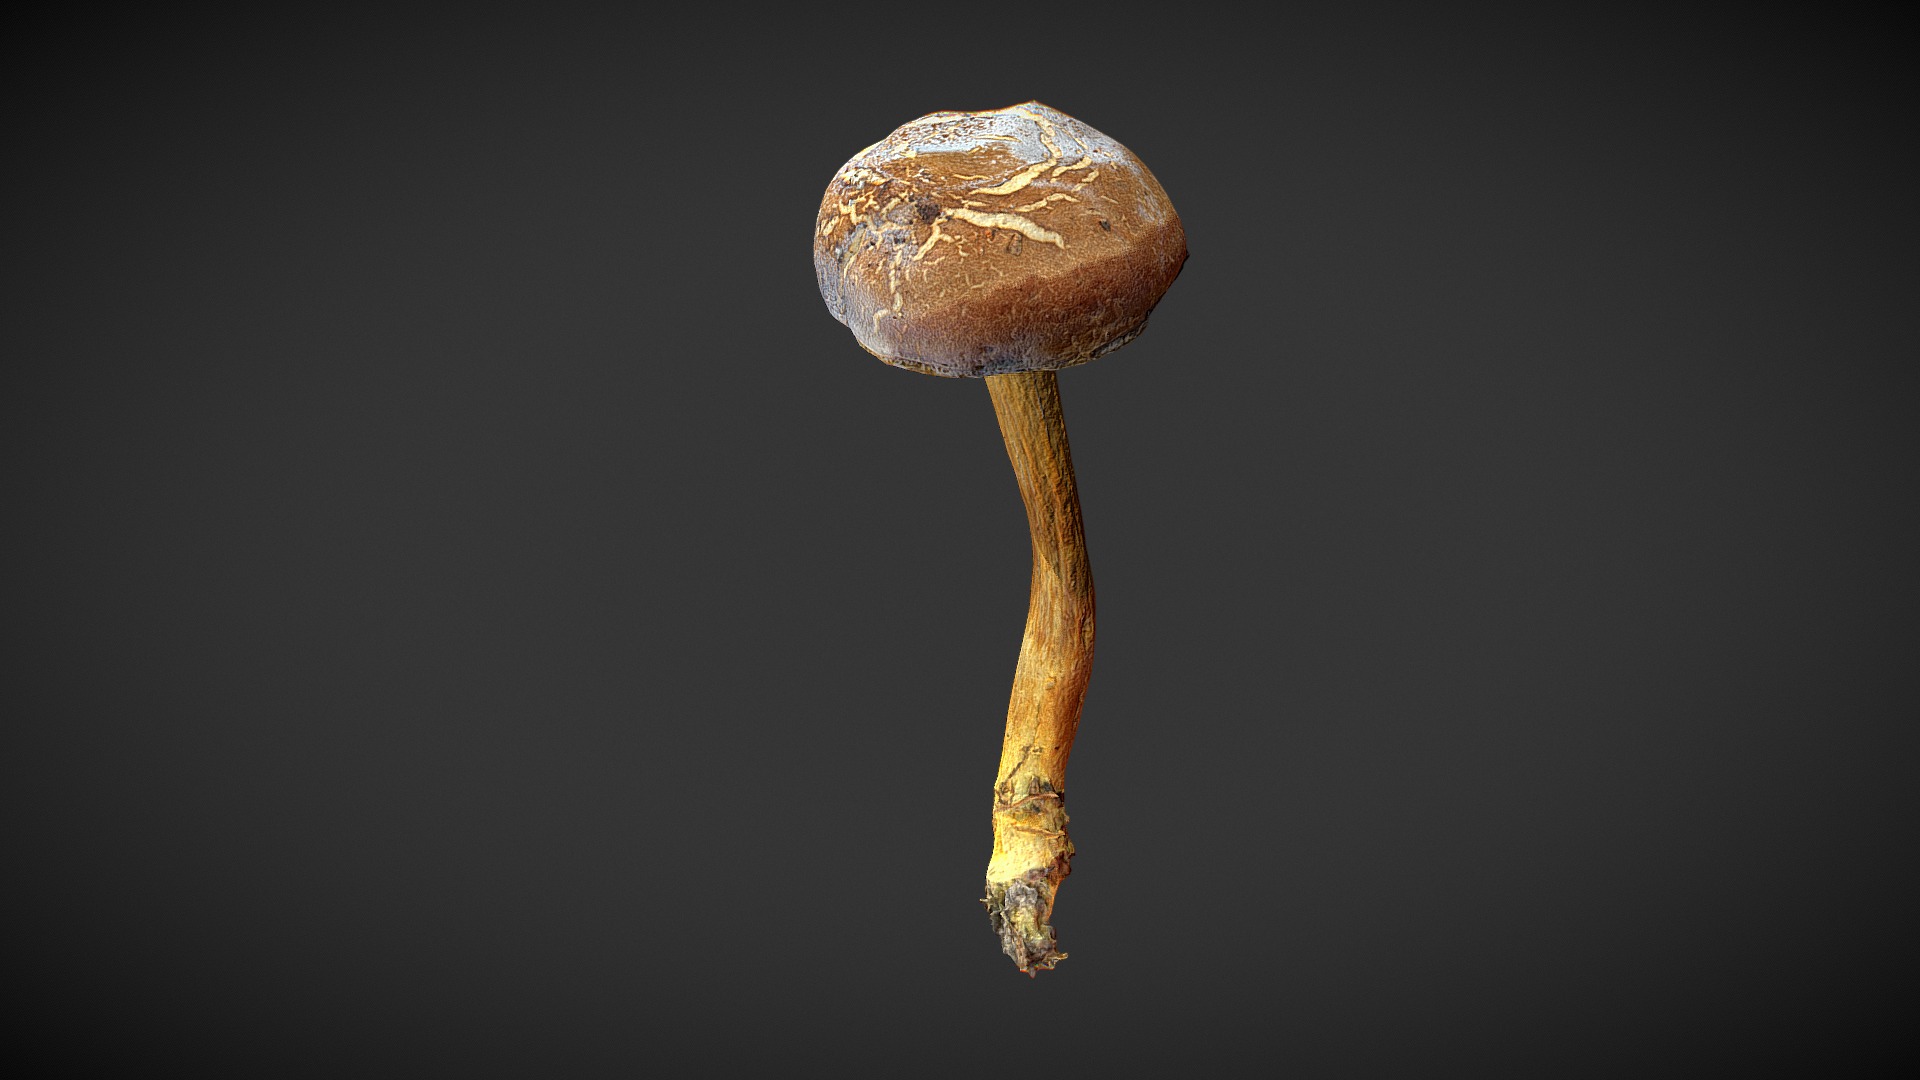 3D model Mushroom 10 - This is a 3D model of the Mushroom 10. The 3D model is about a mushroom with a dark background.